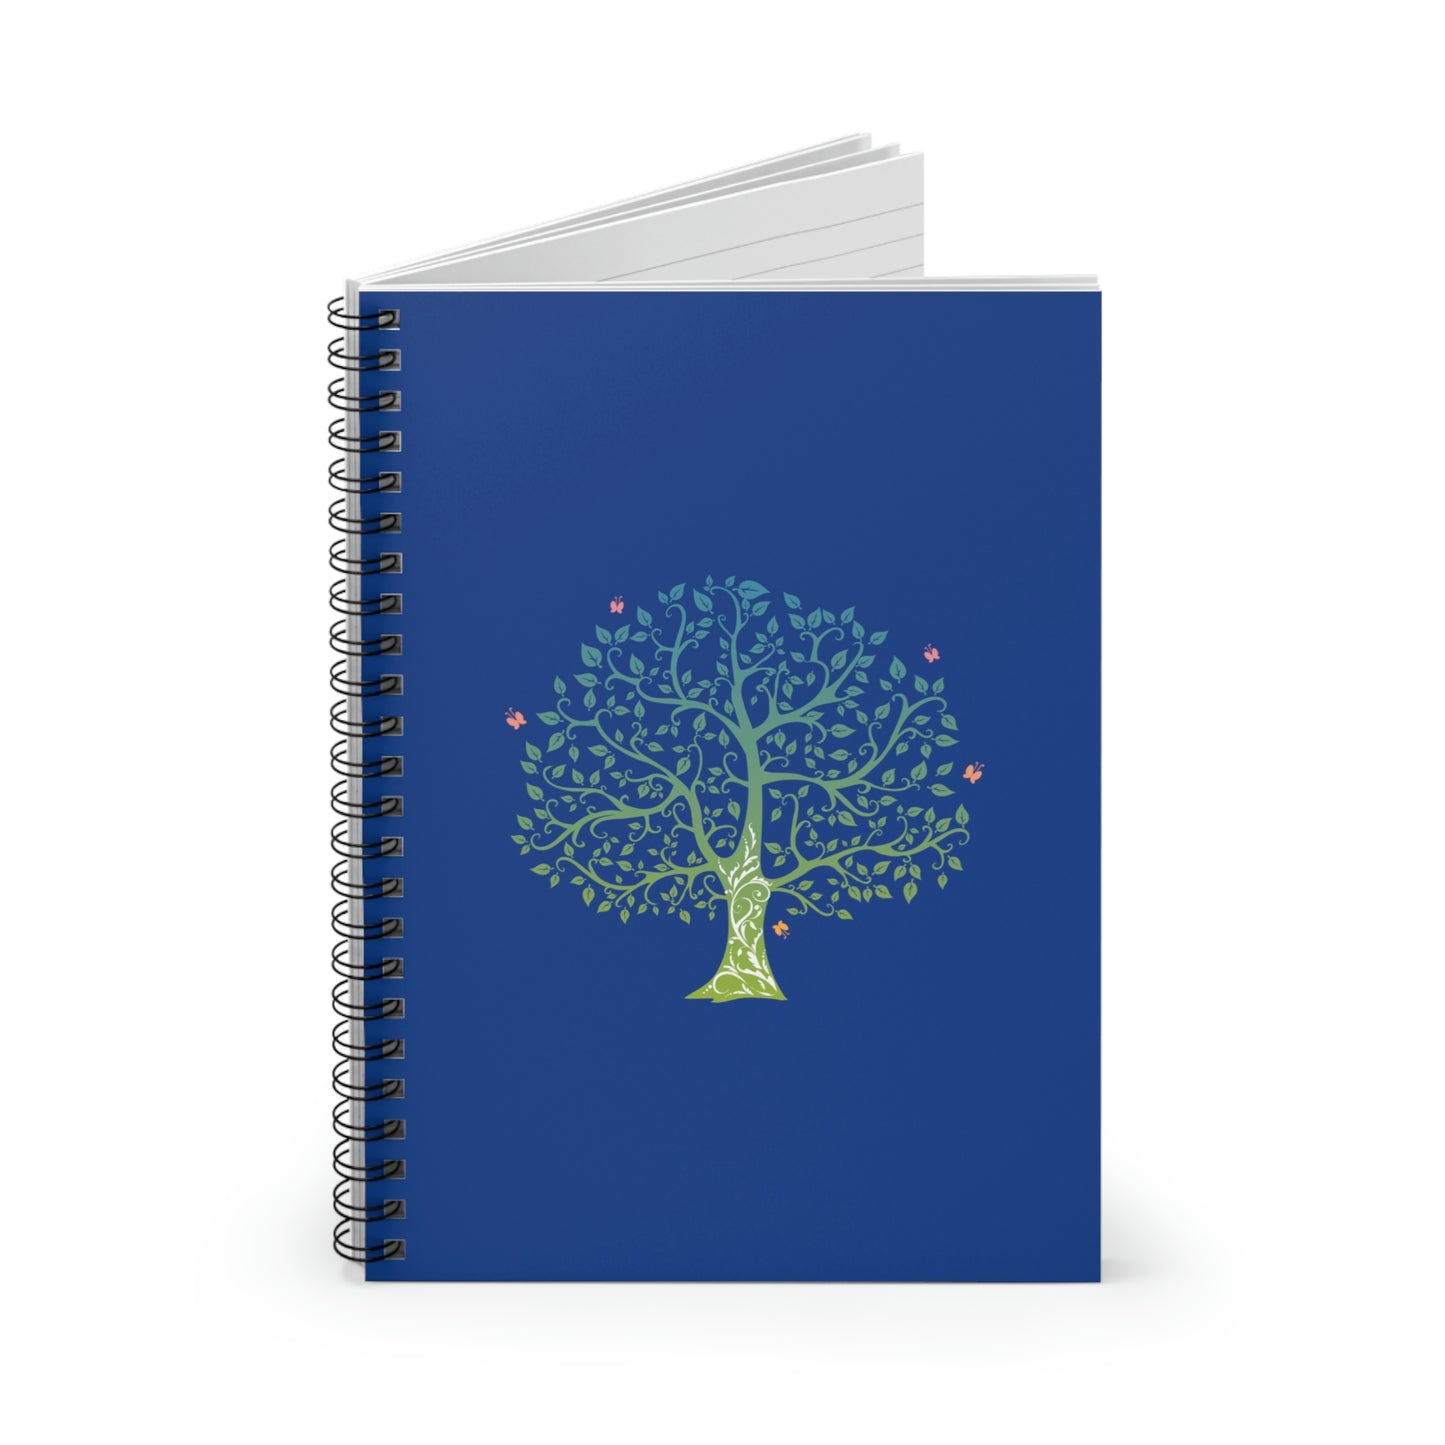 Tree of Life - Spiral Notebook - Ruled Line - Blue Cover